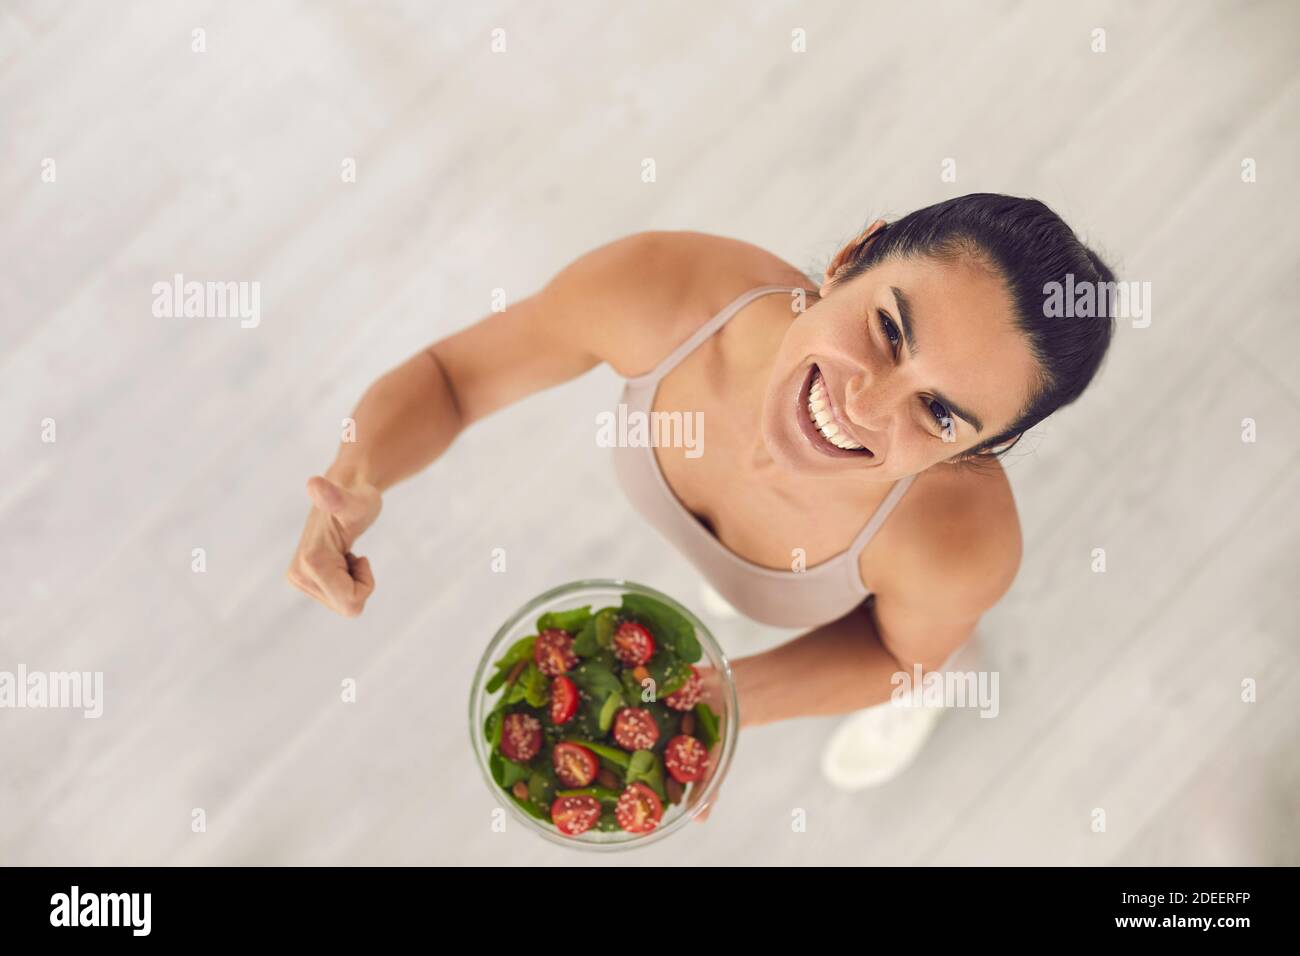 Fit woman holding bowl of vegetable salad, giving thumbs-up and smiling at camera Stock Photo